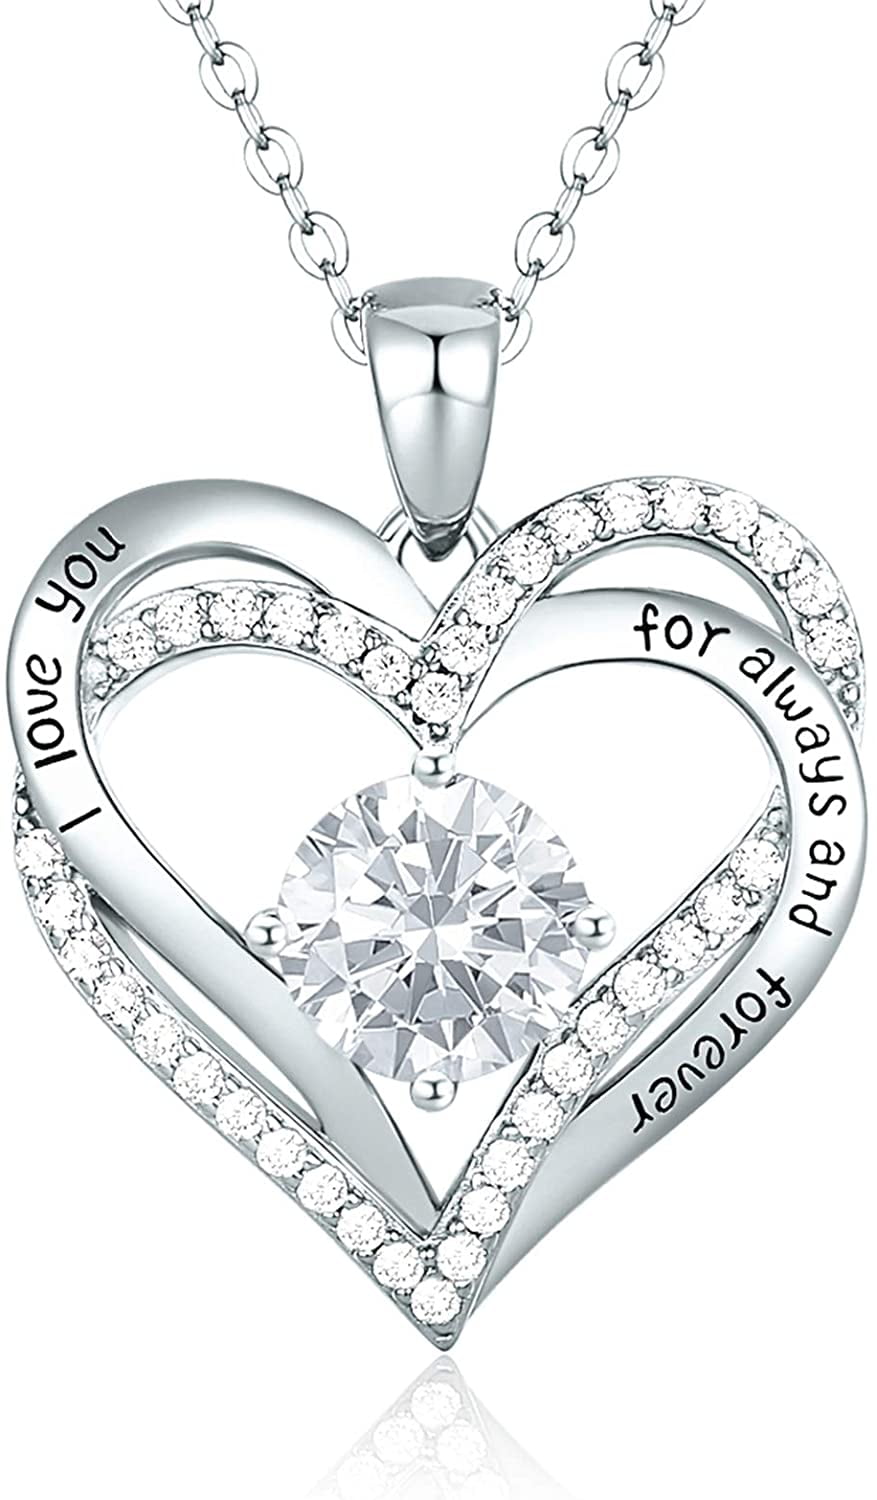 Details about   New Rhodium Plated 925 Sterling Silver Cross with Open Heart Charm Pendant